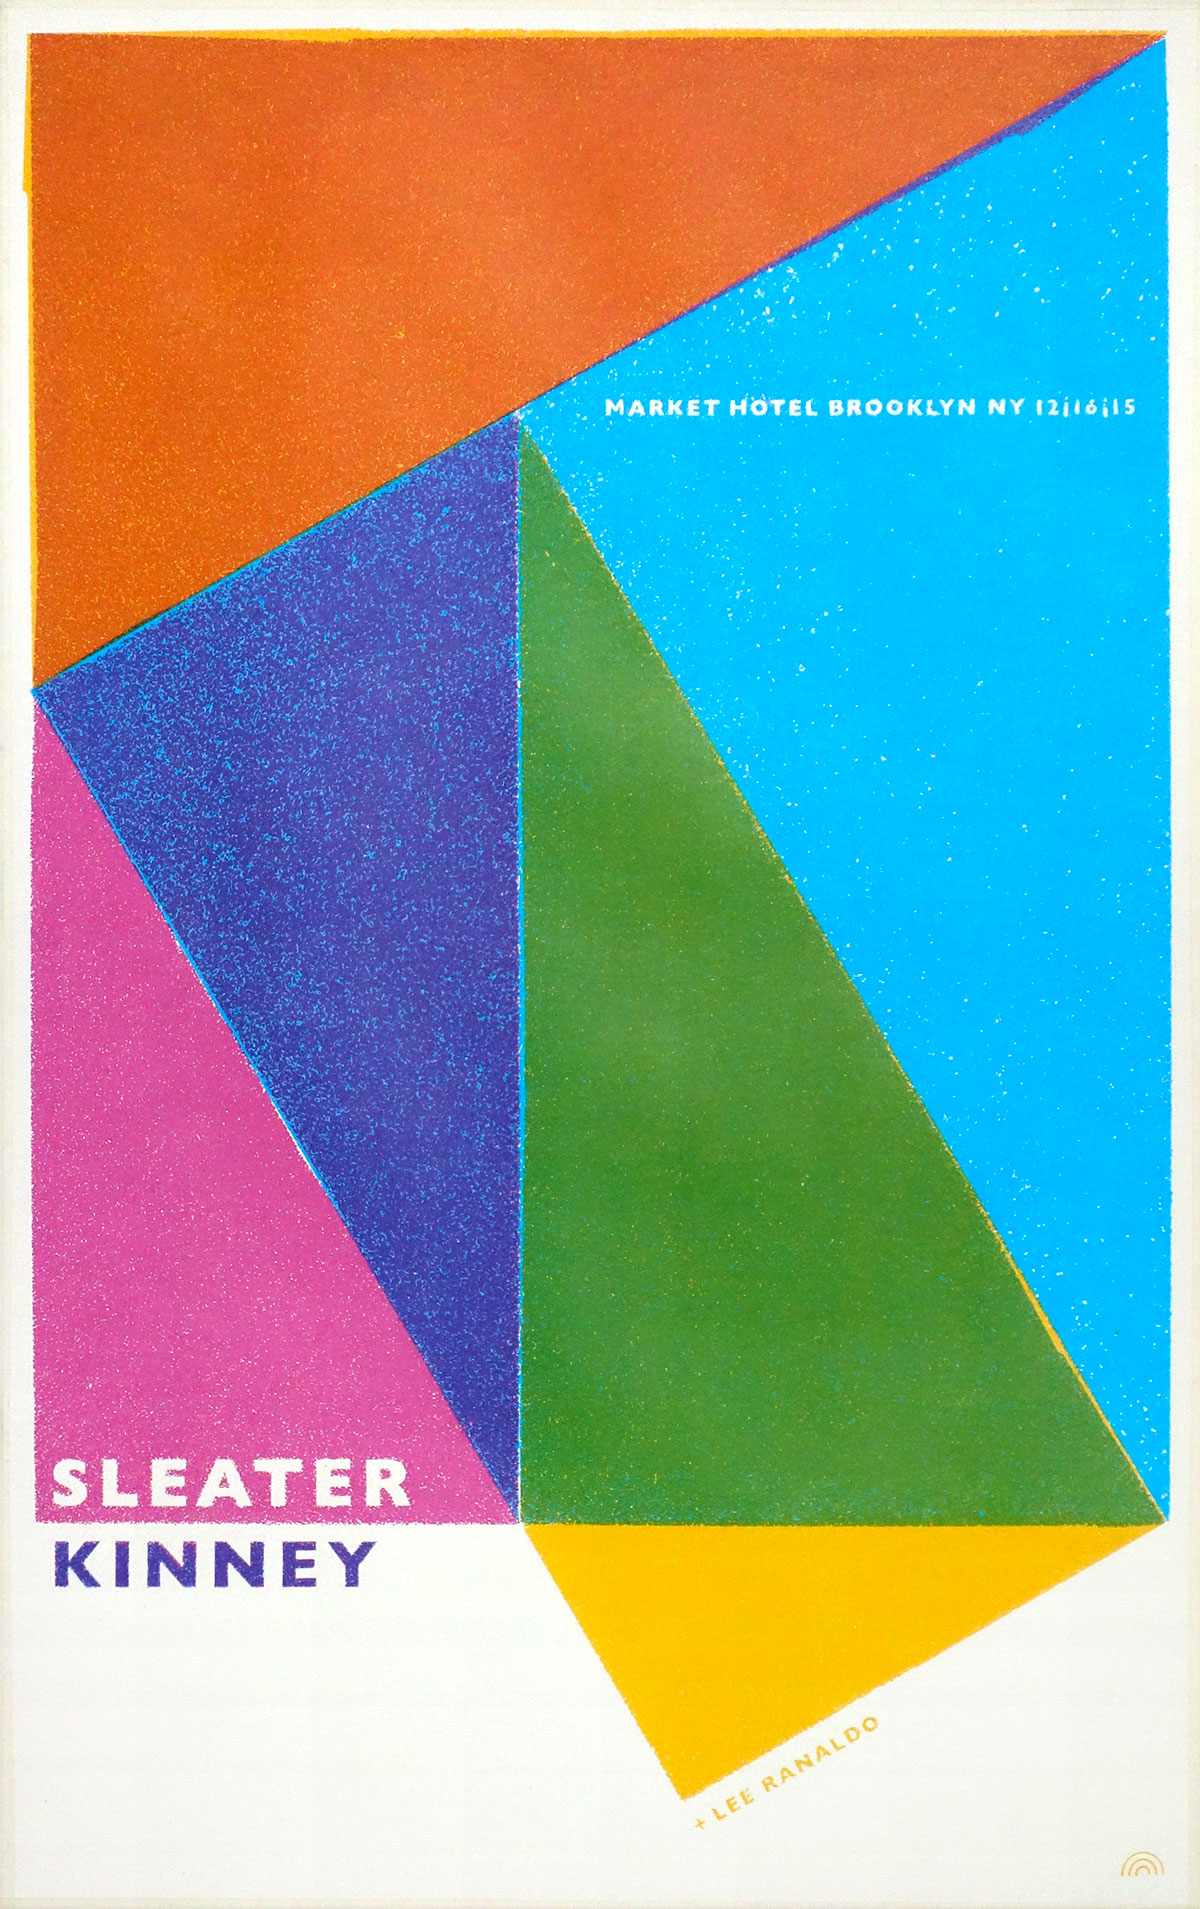 Sleater Kinney gigposter by Rainbow Posters